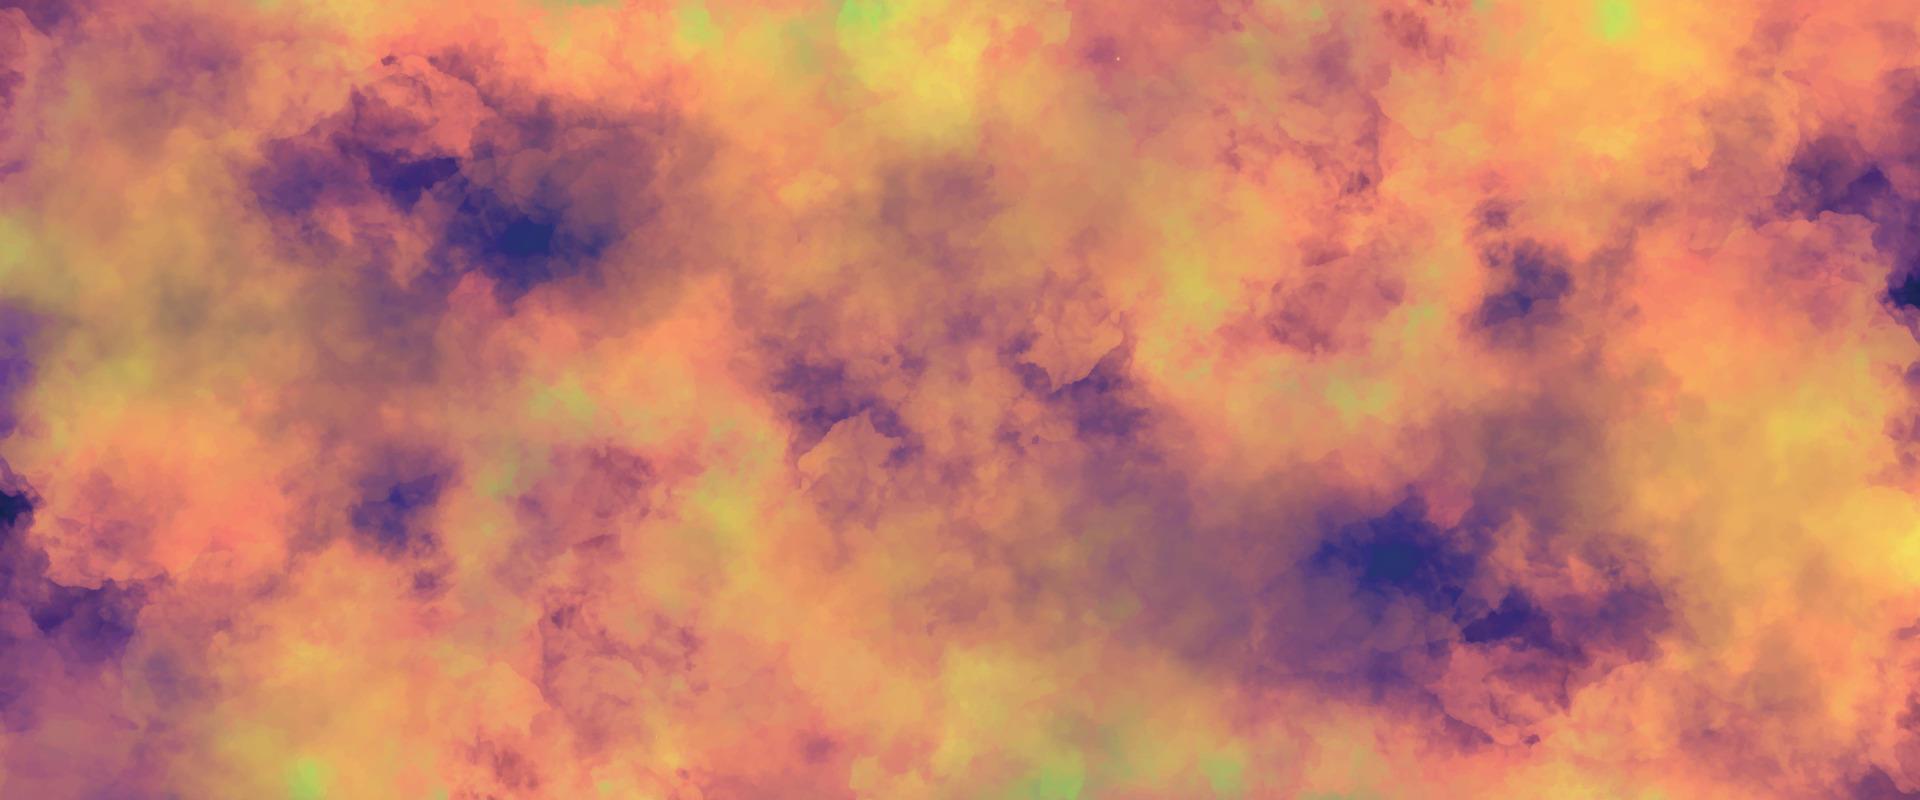 Abstract colorful background. Colorful watercolor grunge paint background. Outer space. Frost and lights background. Nebula and stars in space vector